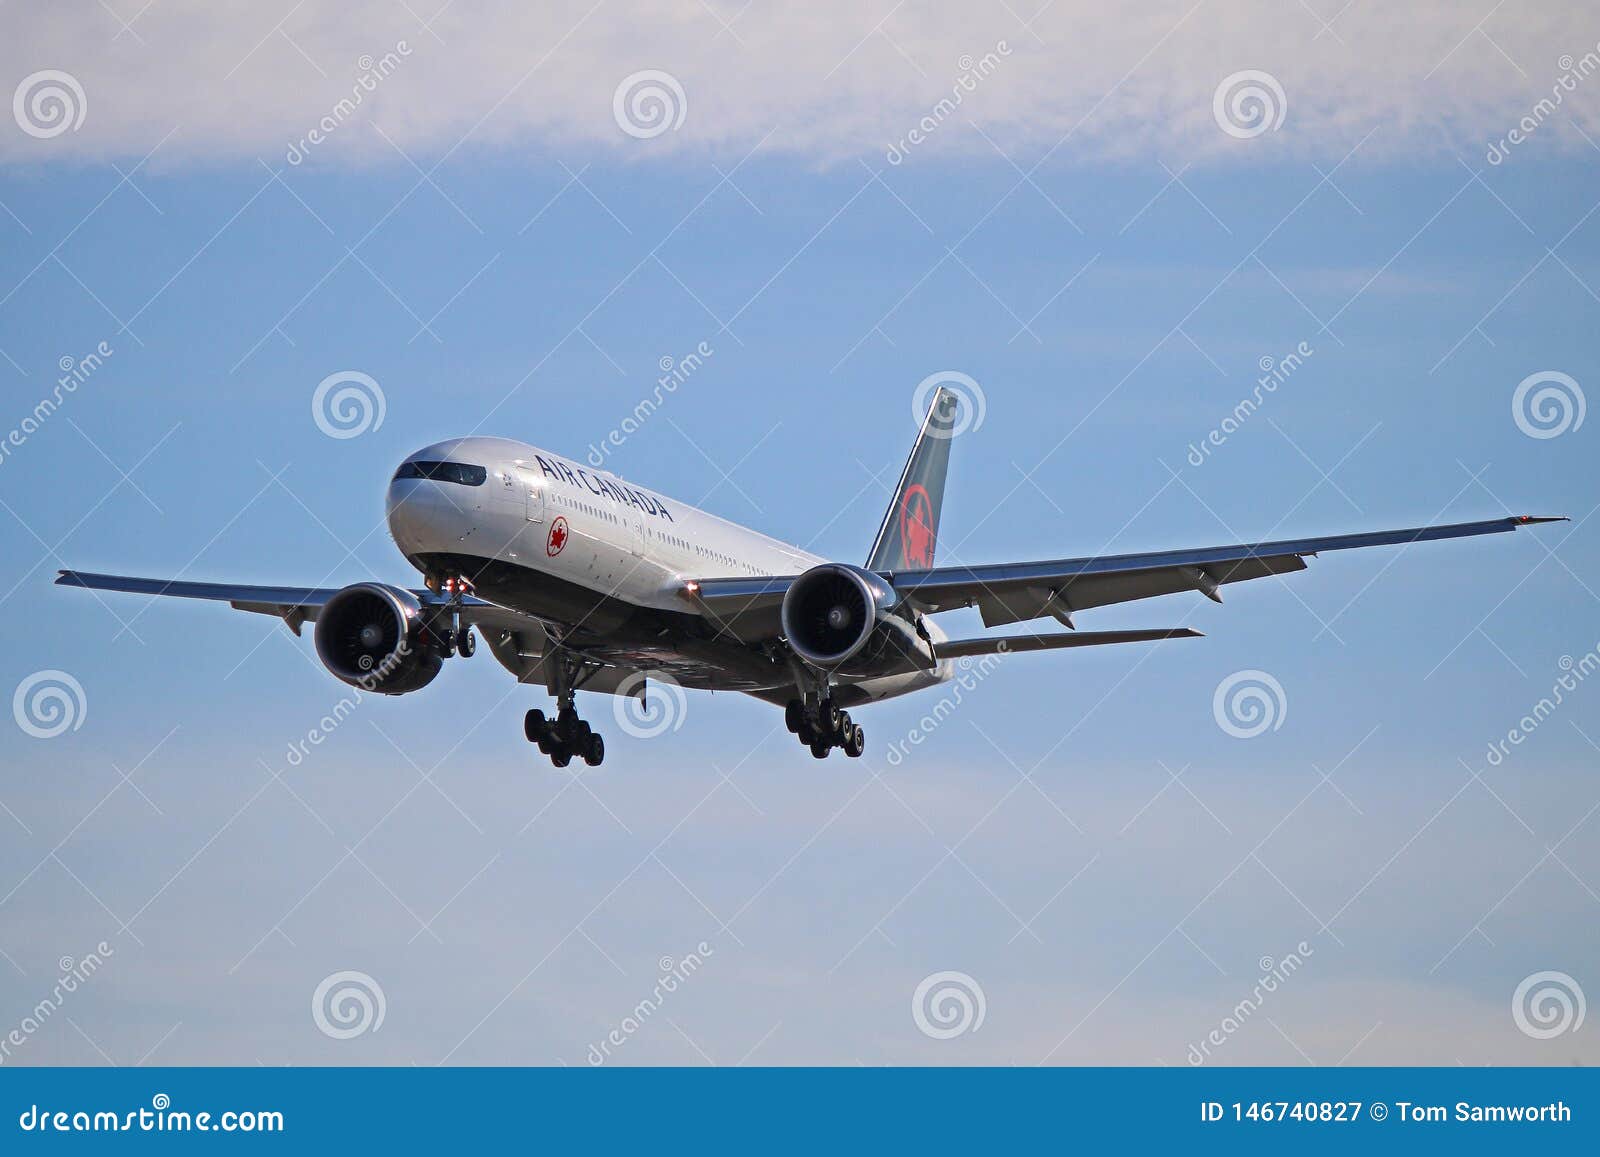 Air Canada Boeing 777 200lr In New Livery About To Land